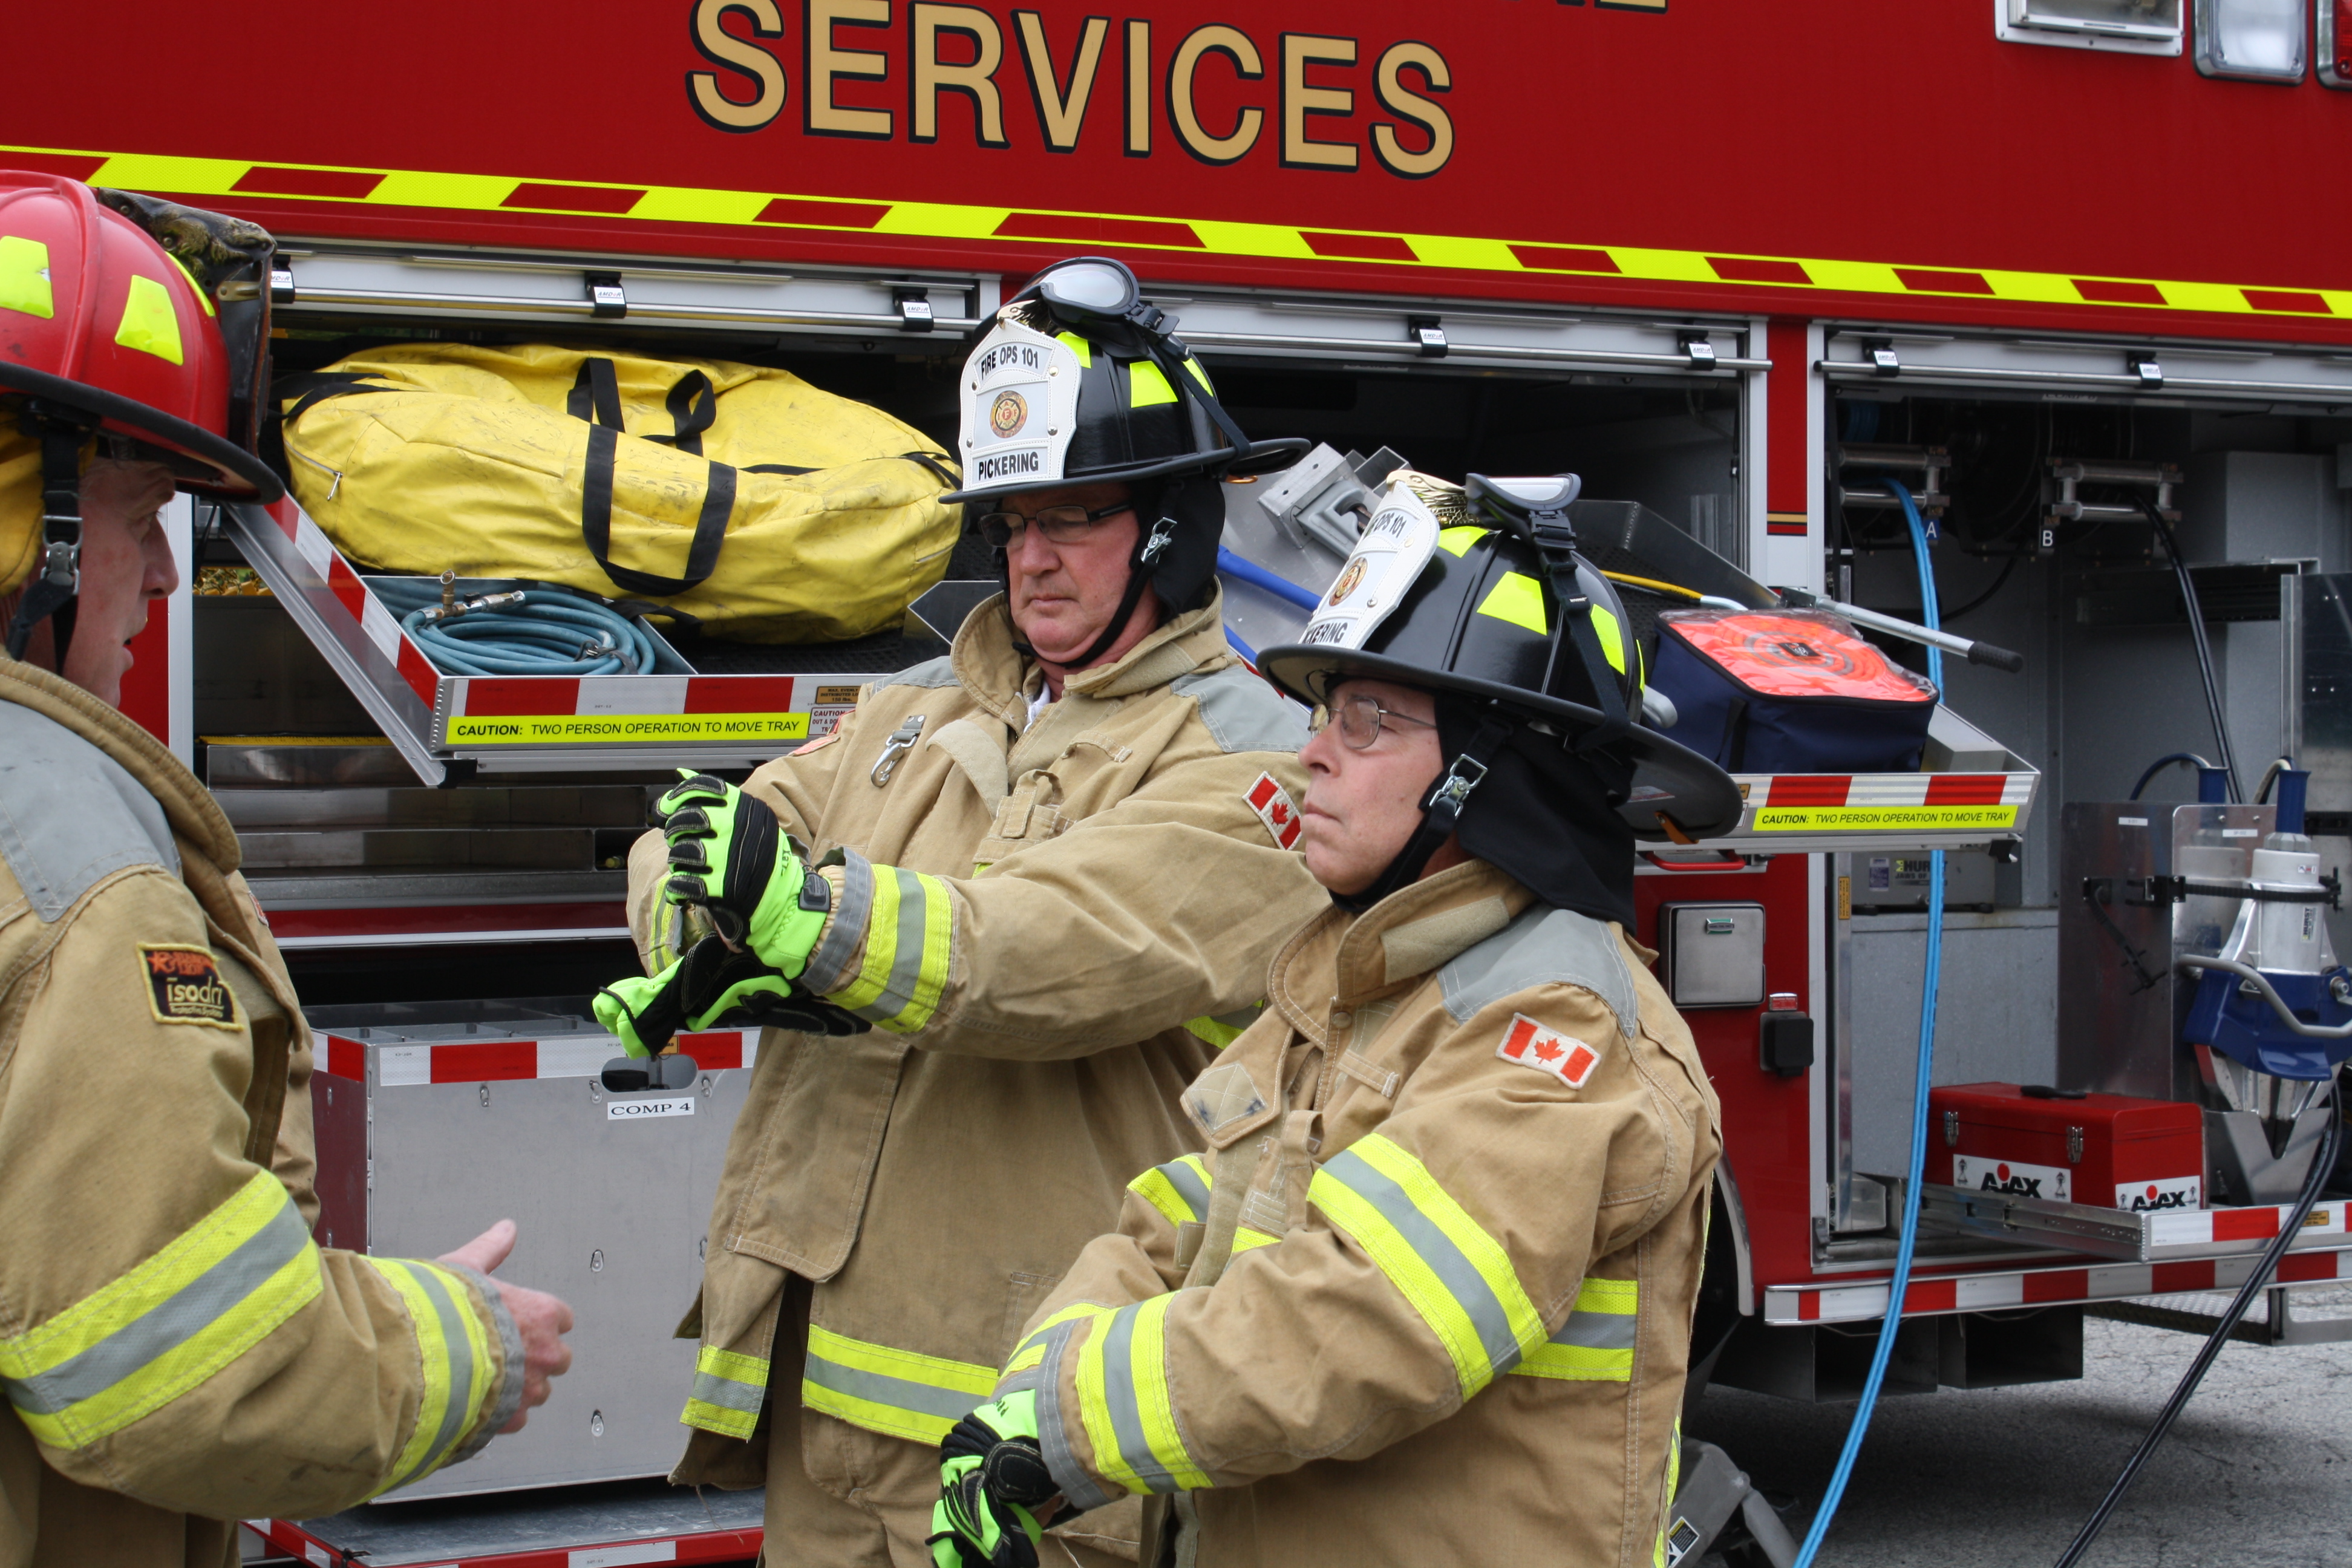 Fire Services training